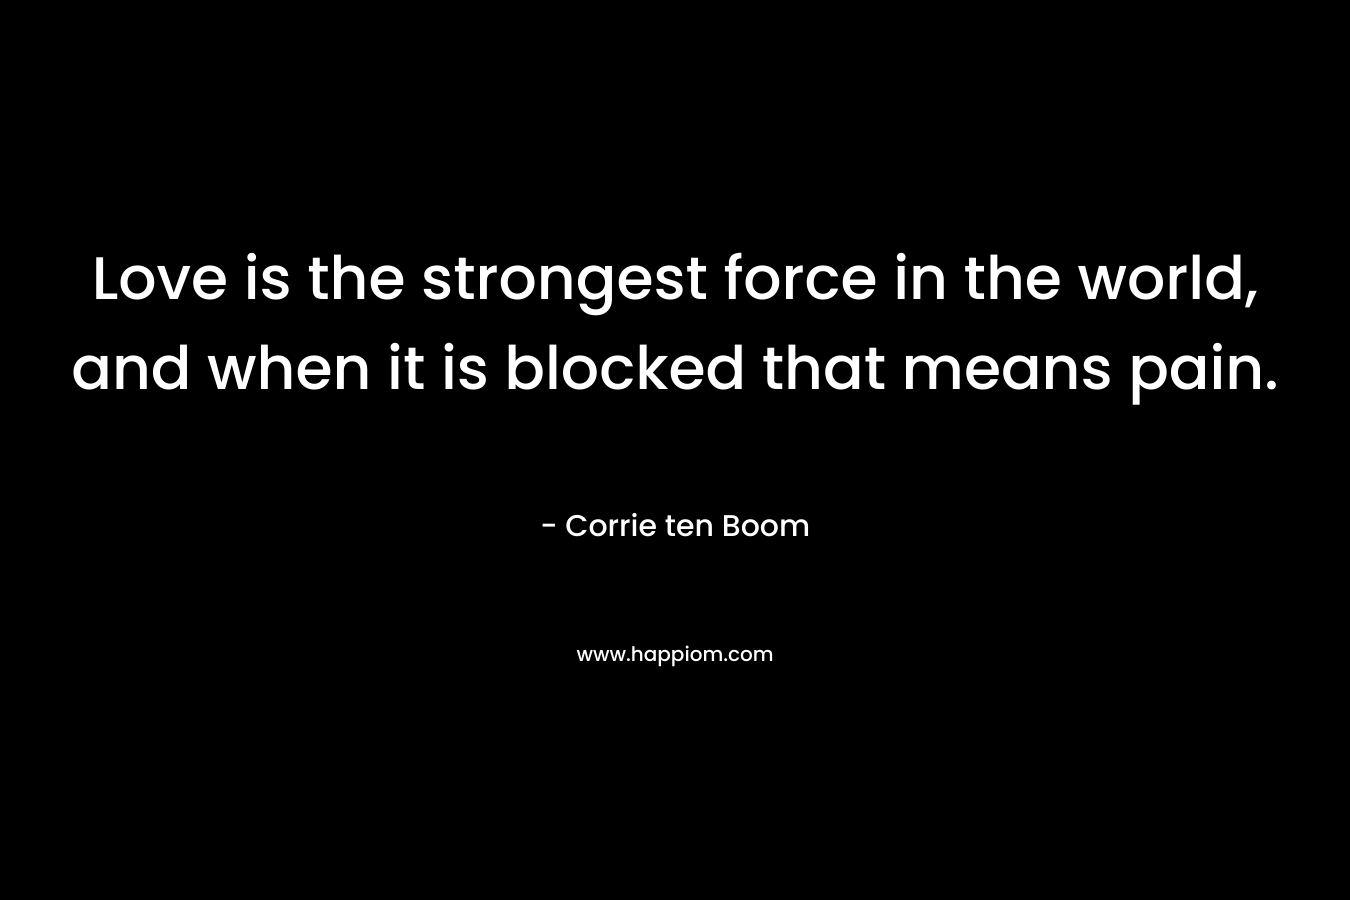 Love is the strongest force in the world, and when it is blocked that means pain.